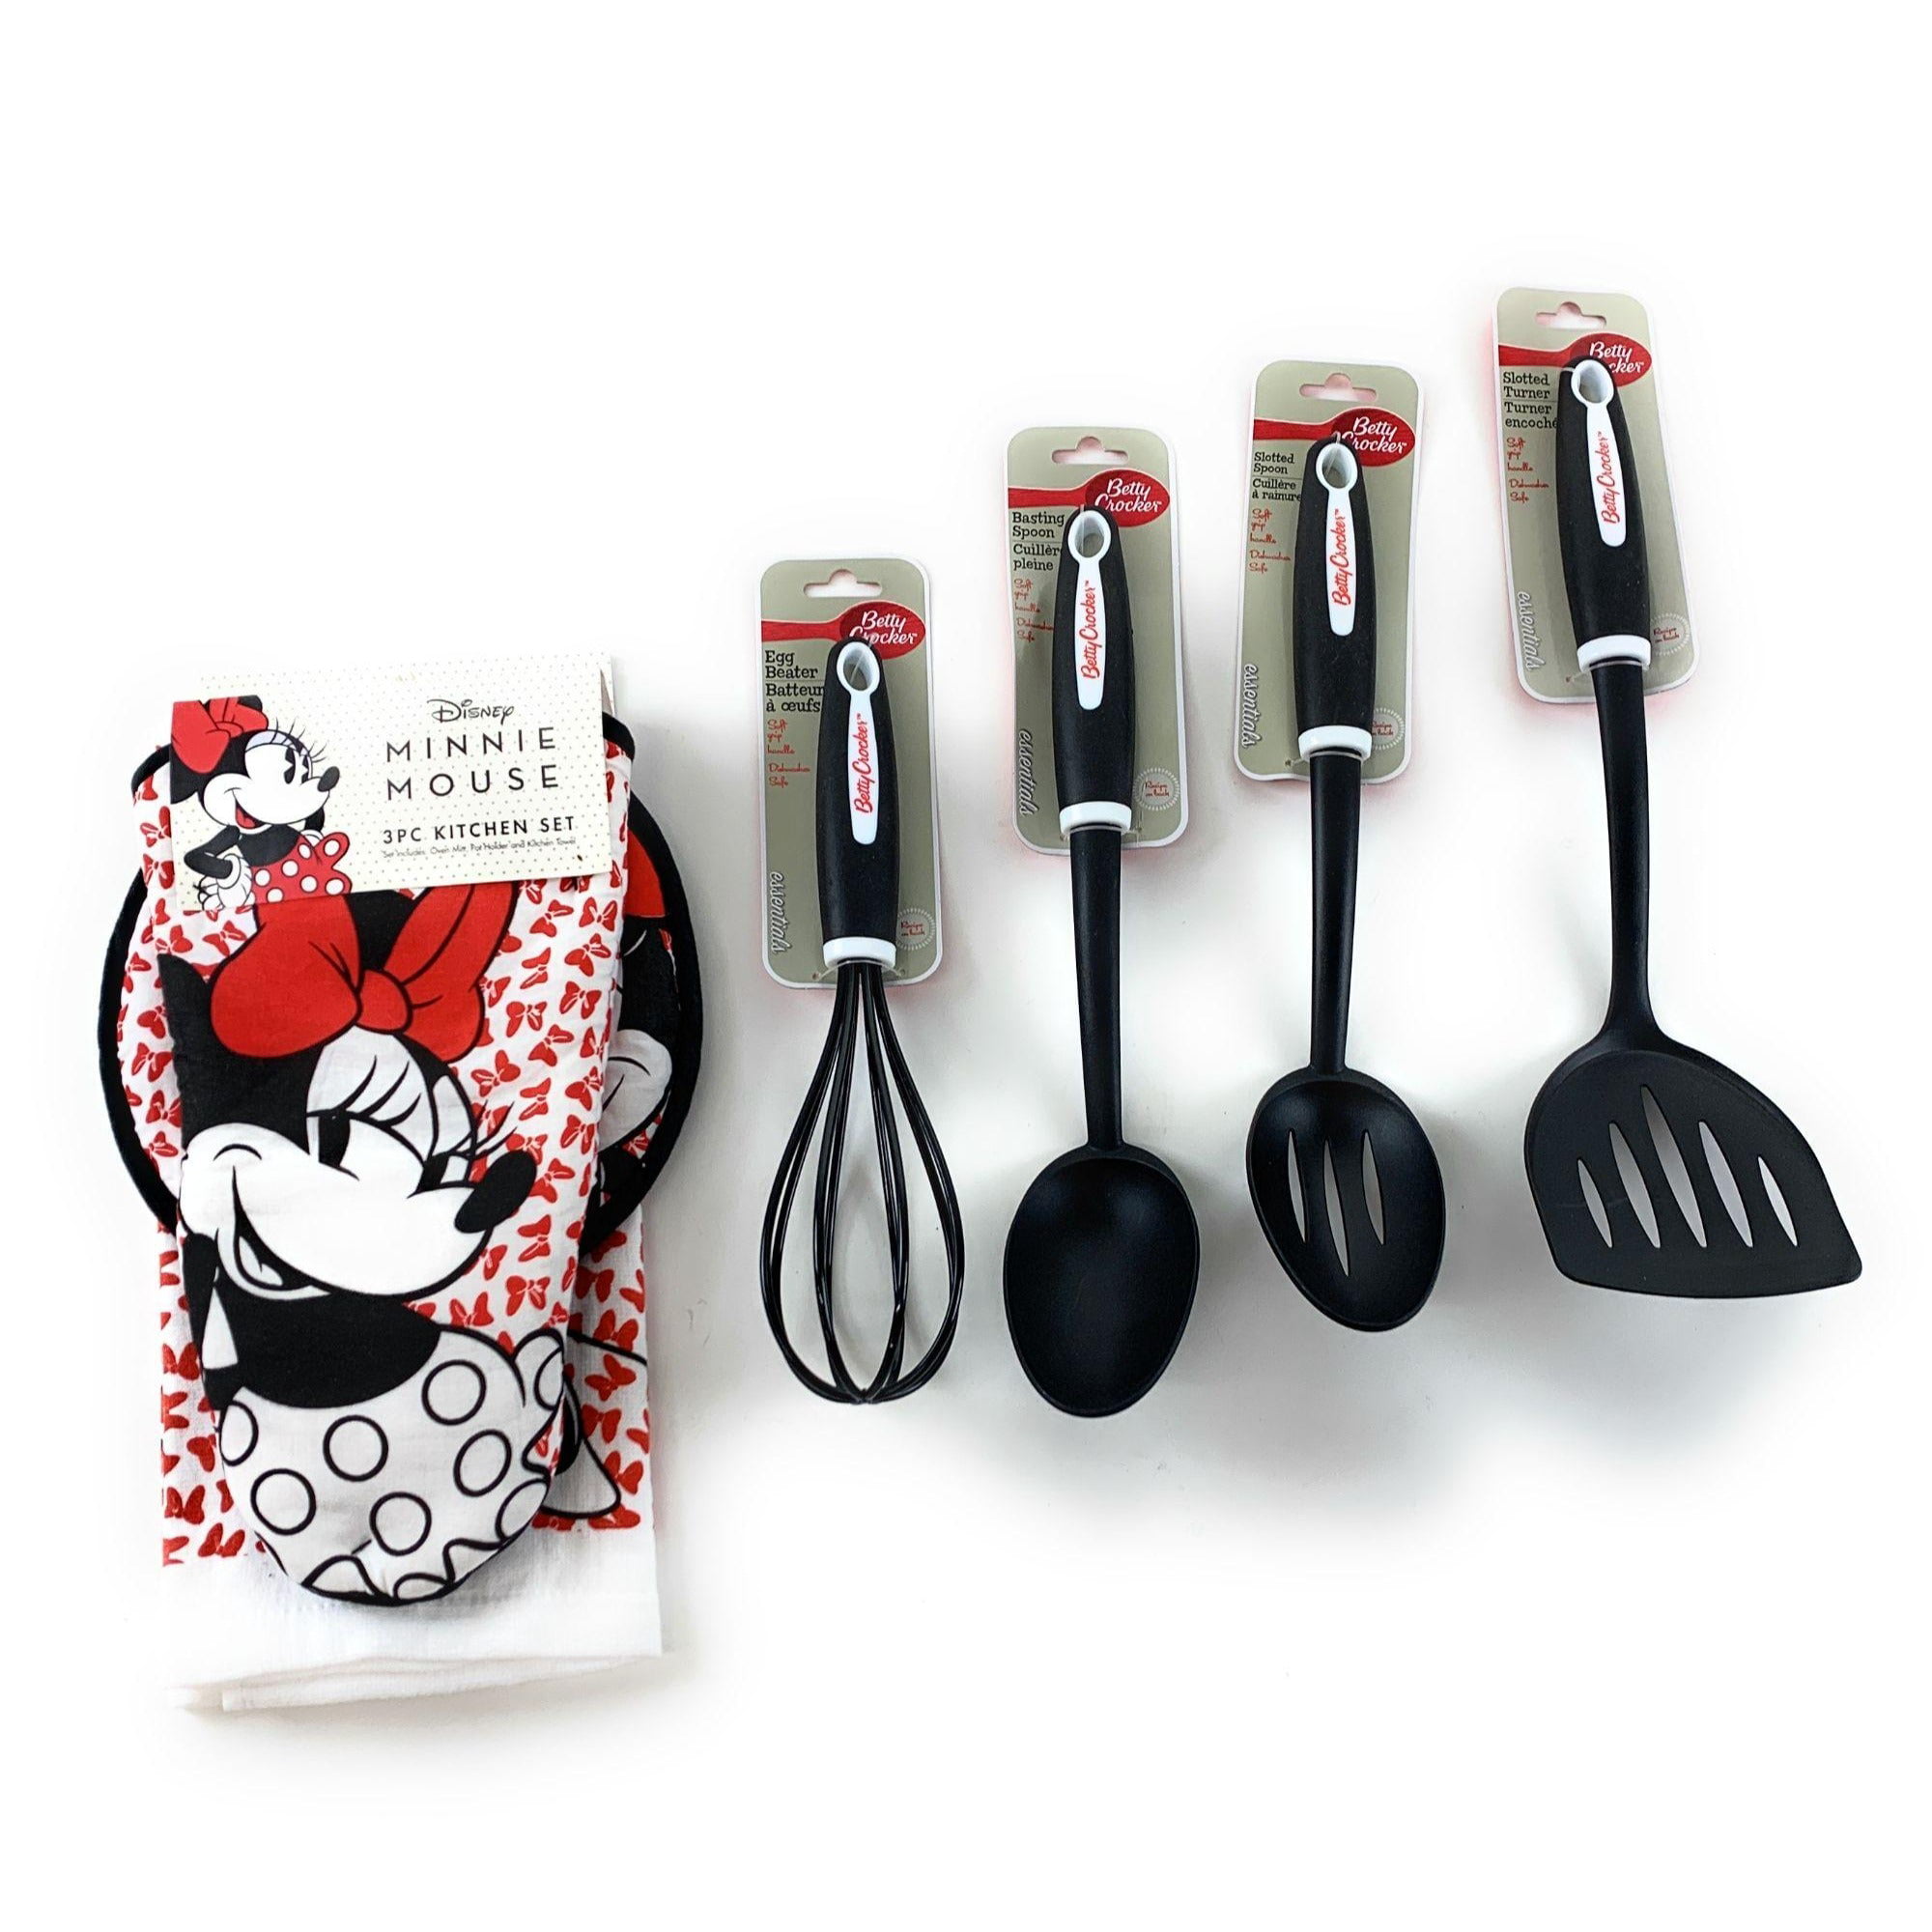 Classic Disney Mickey & Minnie Kitchen Supplies Set - Bundle with Black &  Red Classic Mickey & Minnie Mouse Pot Holders & Oven Mitts (Disney Kitchen